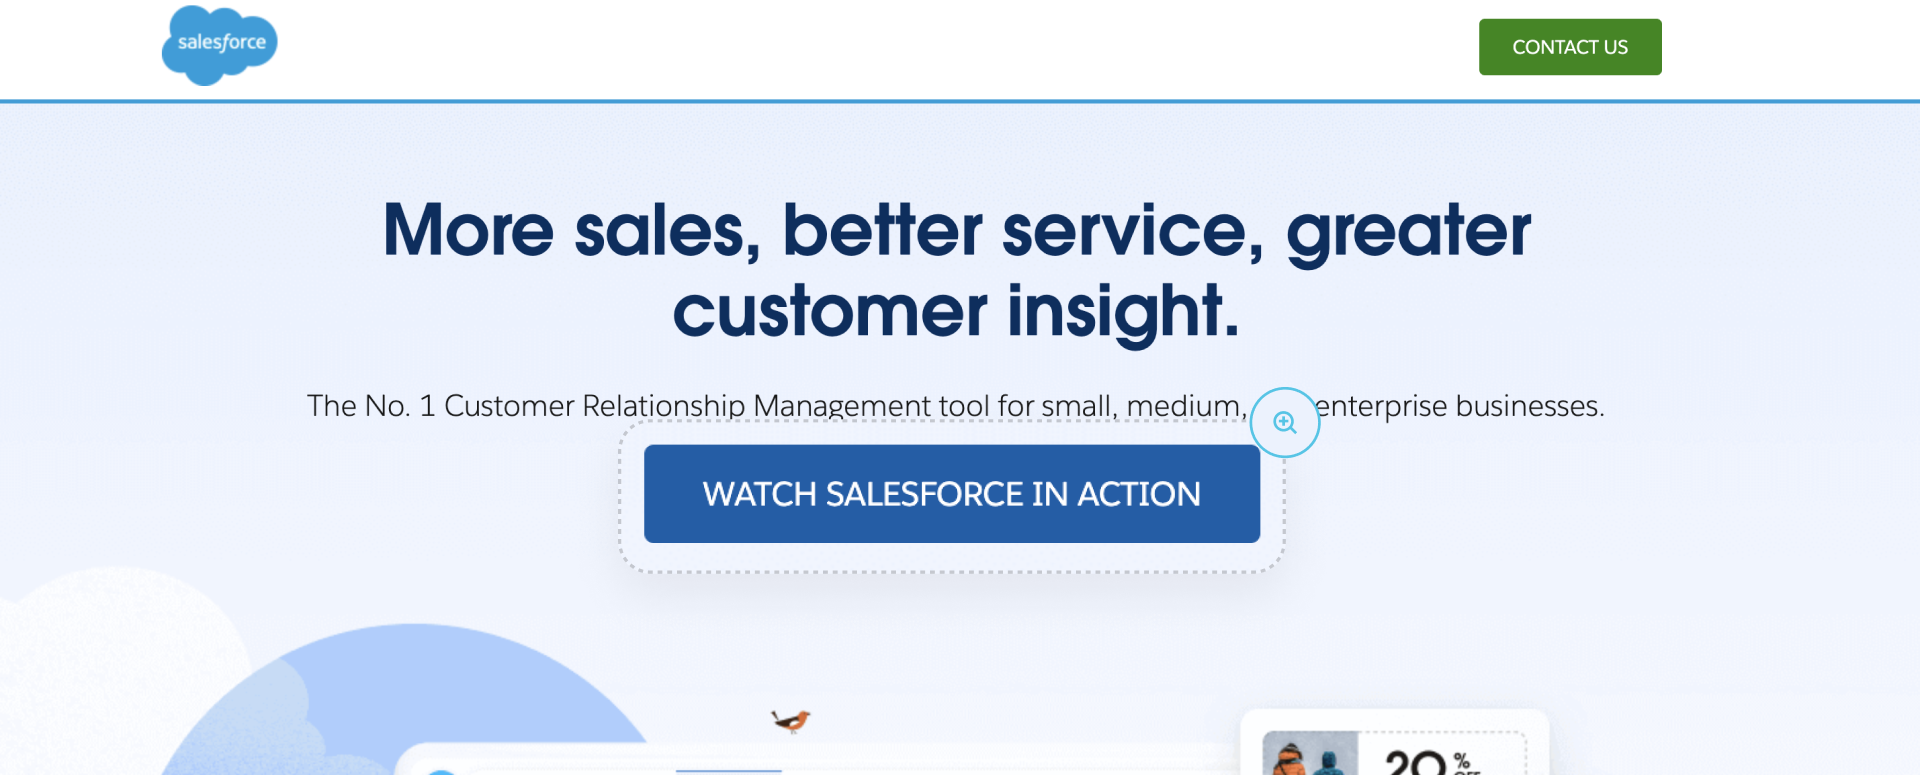 Salesforce landing page screenshot with blue WATCH SALESFORCE IN ACTION call-to-action button